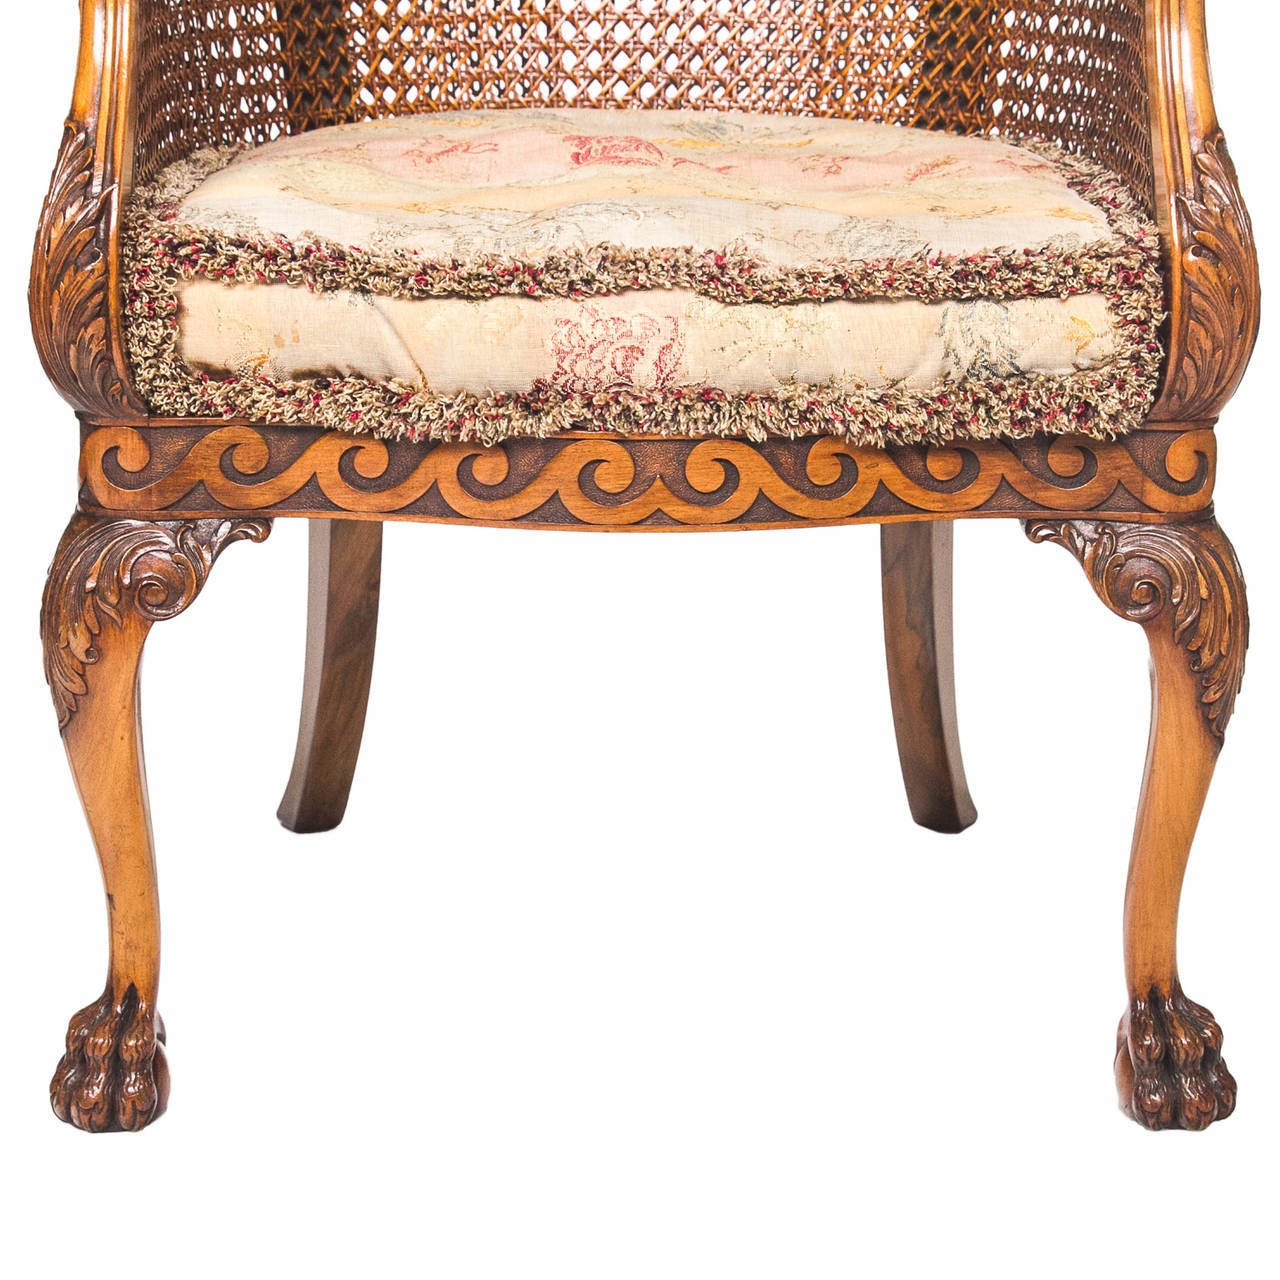 This is a grand pair of English walnut barrel back chairs with cane backs and seats. There is the original cushion fitted for seating. Superb color and finish to these chairs. The apron of these chairs are presented with an impressive vitruvian